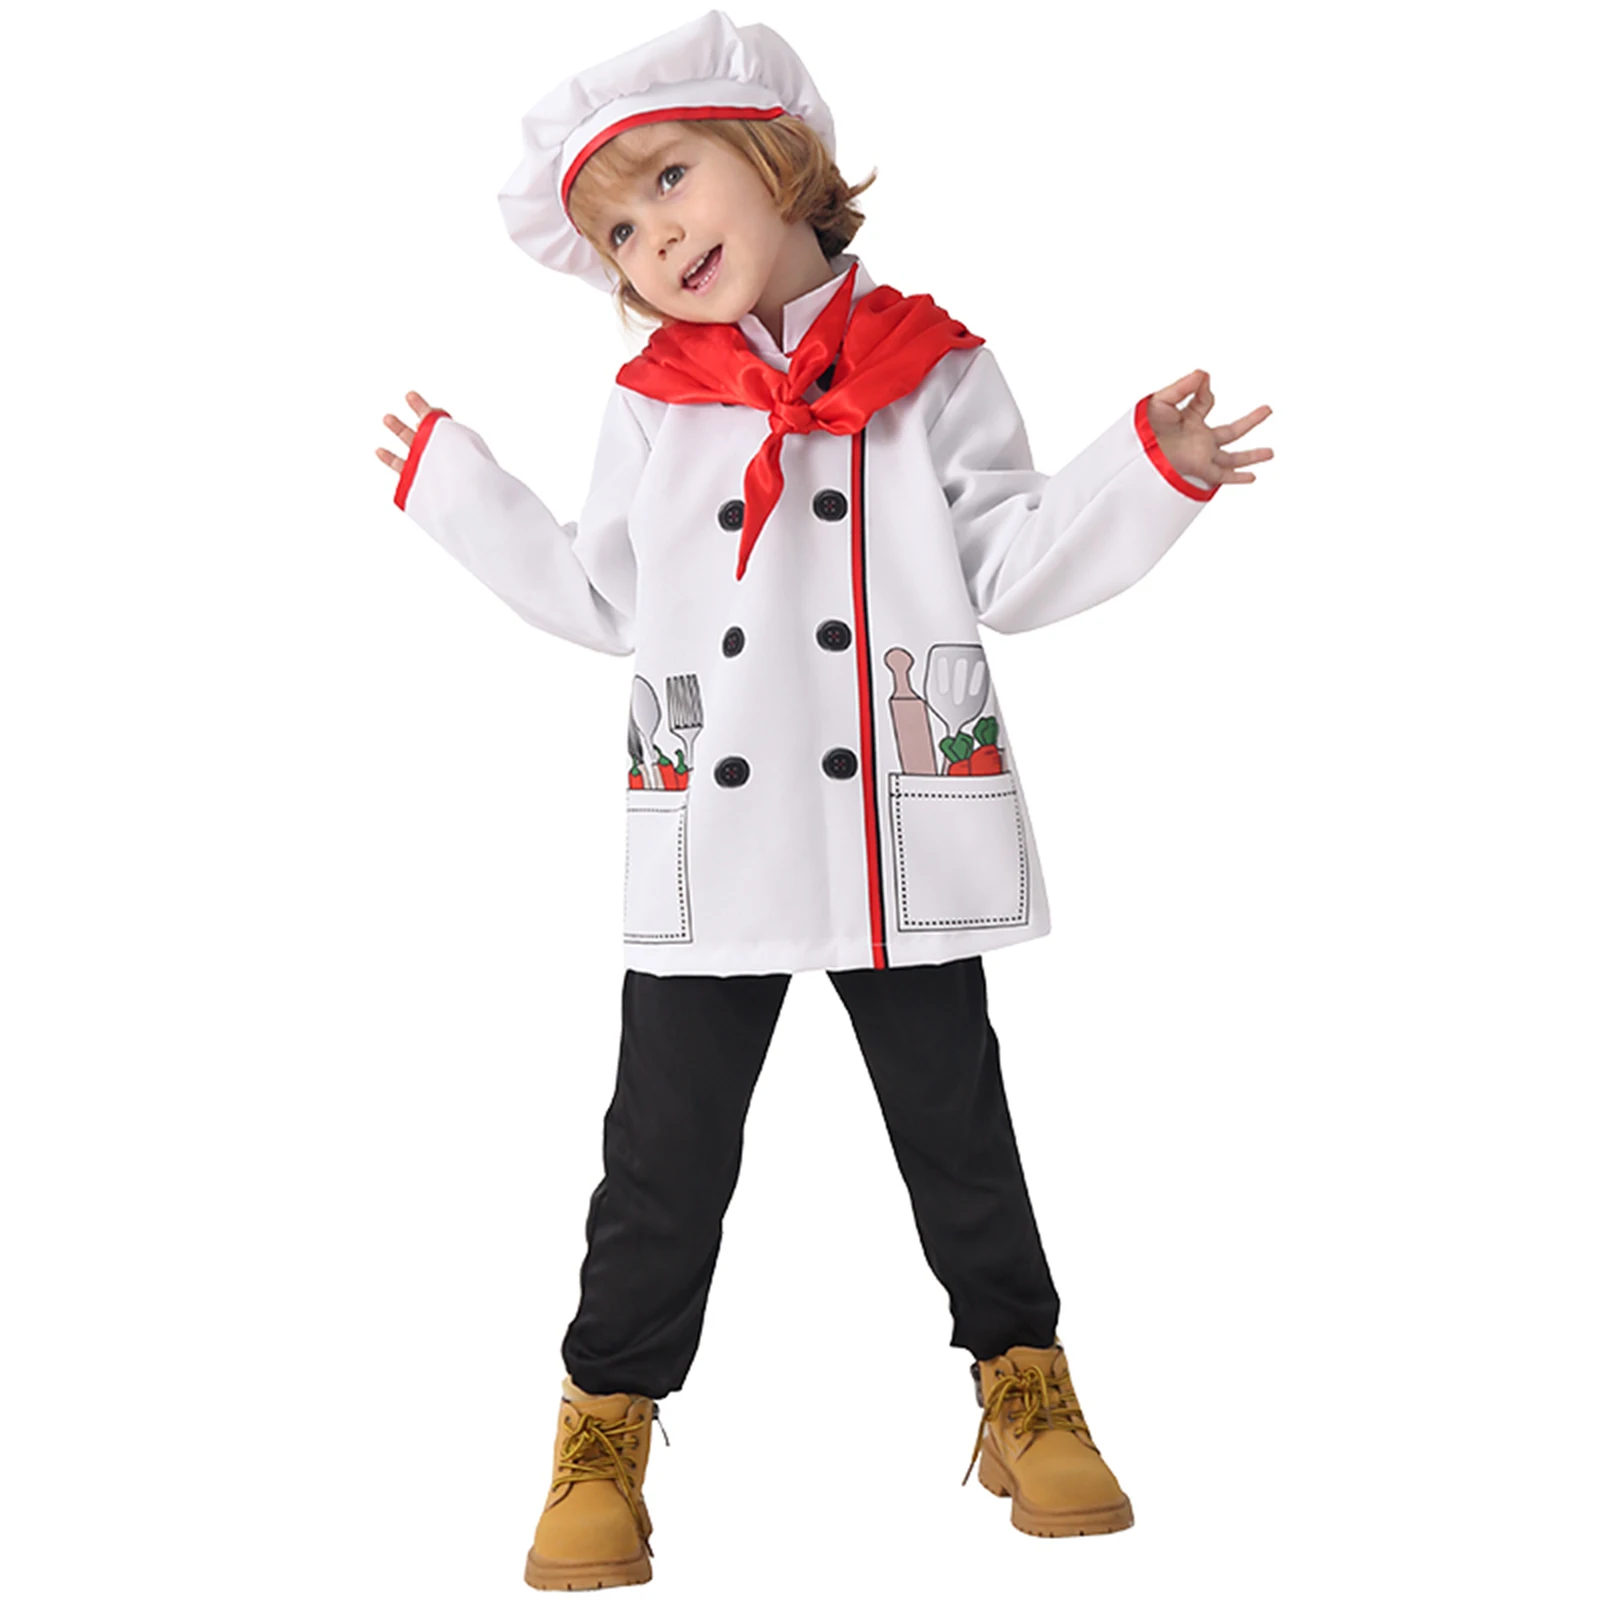 

Kids Girls Kitchen Uniform Photography Props Outfit Boys Cook Chef Cosplay Costume Chef Hat Chef Top Dress Apron Scarf Set